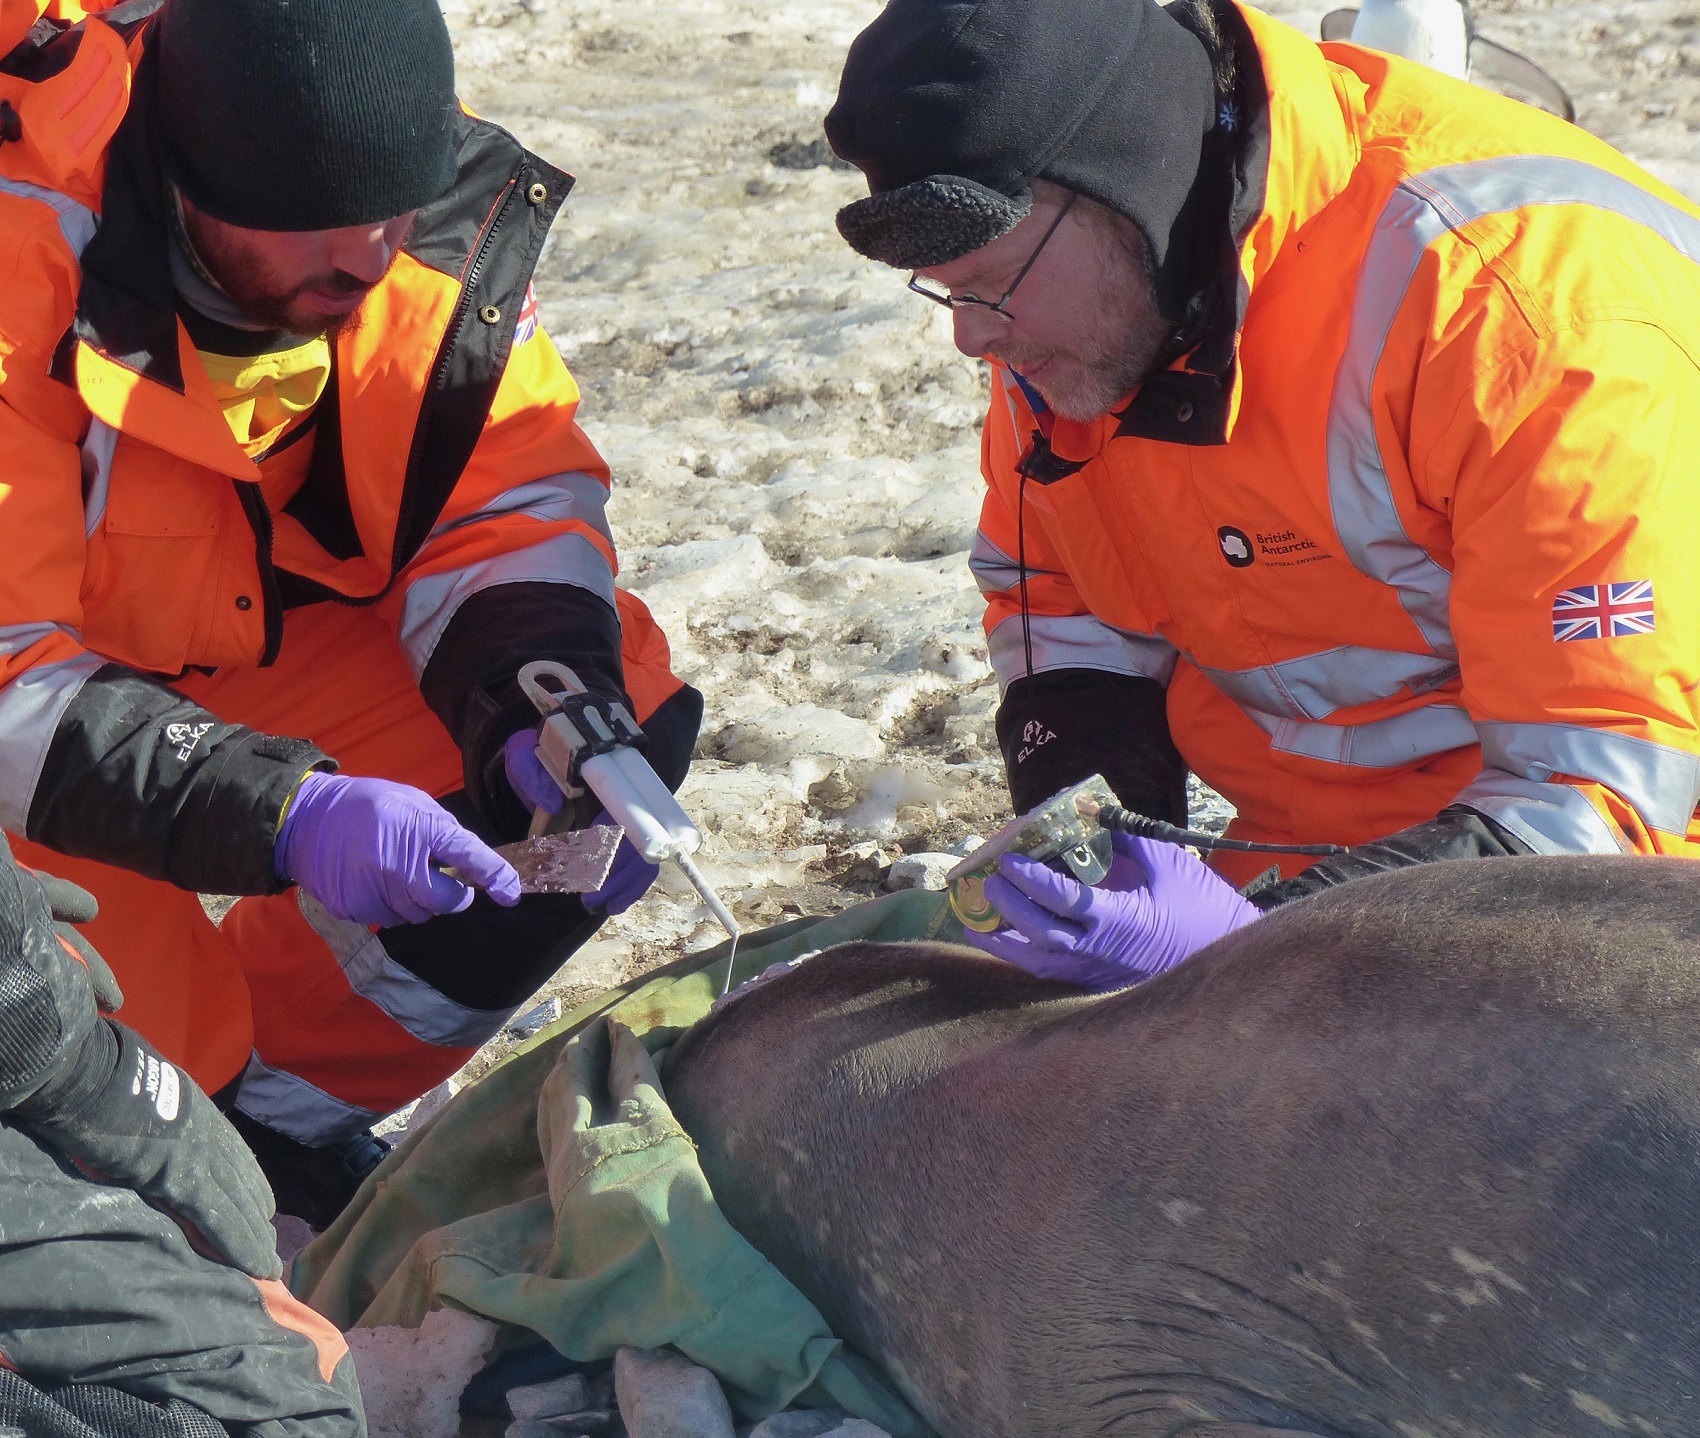 Gui Bortolotto (left) uses an epoxy applicator and putty spatula to spread a thick layer of epoxy onto the seal's head and deep into her fur before adhering the CTD device that Lars (right) holds ready to put on. Photo credit: Tasha Snow